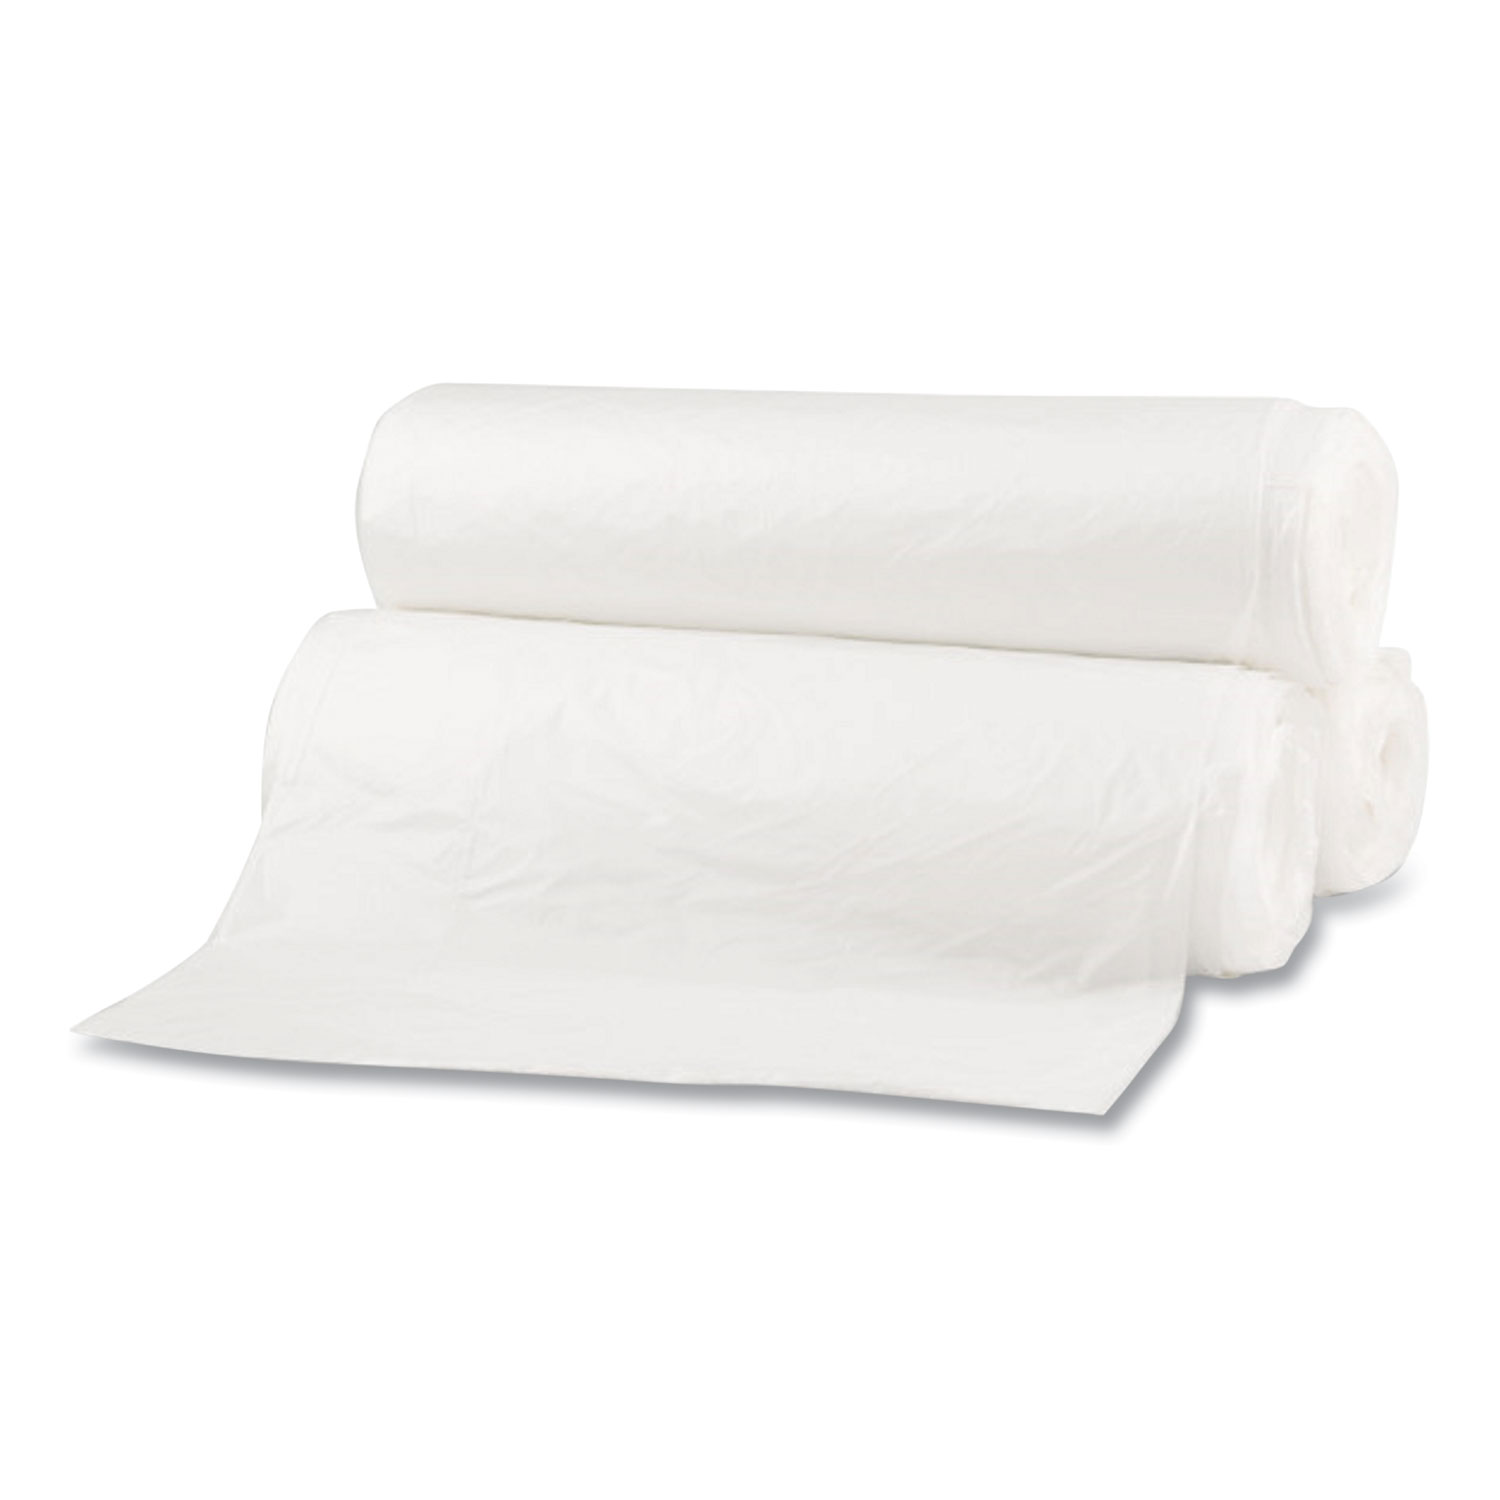 Boardwalk® Repro Low-Density Can Liners, 55 gal, 0.63 mil, 38 x 58, White, 10 Bags/Roll, 10 Rolls/Carton